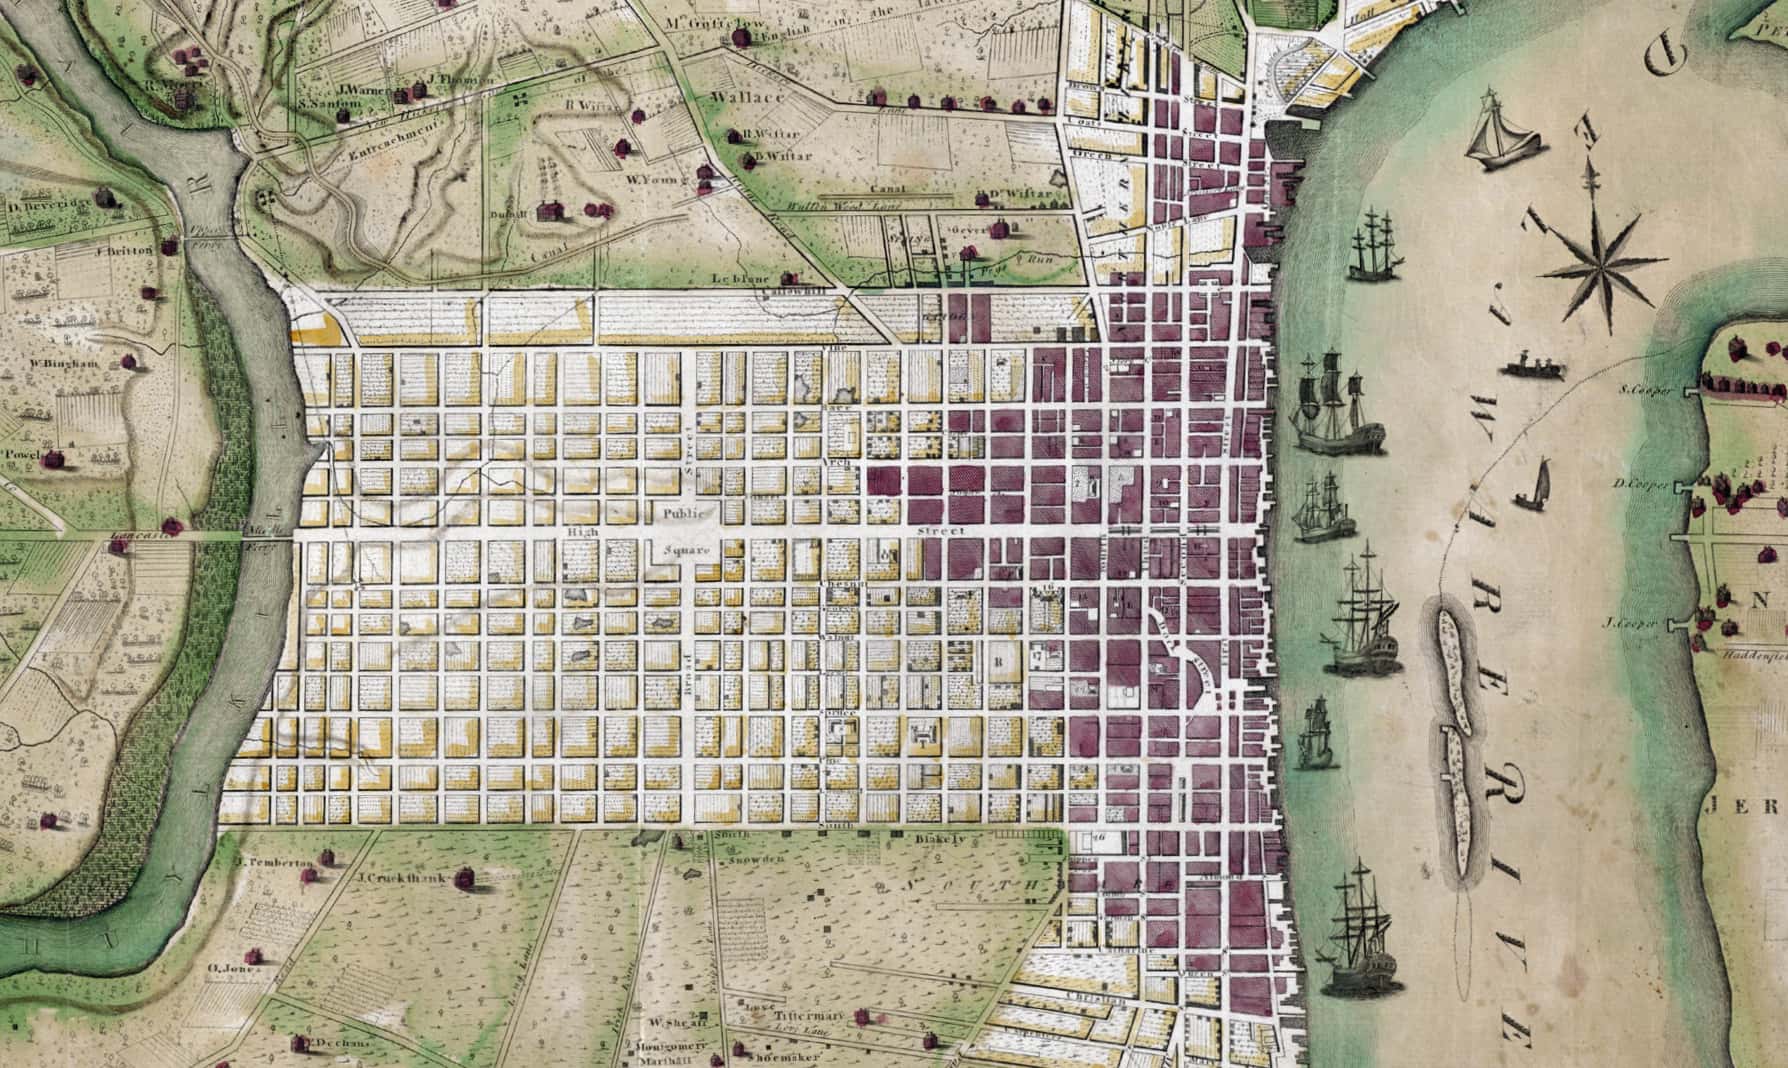 The 1683 plan for Philadelphia was designed in a grid pattern from river to river. This c. 1796 map shows that the city grew instead from east to west along the Delaware River and expanded north to south along the riverfront. The large brownringed, rounded rectangle in the upper left corner is a high flat landform called the Faire Mount, the future sight of the reservoir and Water Works. Natural streams are delineated by winding black lines; many streams were eventually covered over and used as sewers and the infilled land became the foundation for building development, particularly of row home (Source: P. C. Varle, artist, and Scott, engraver)